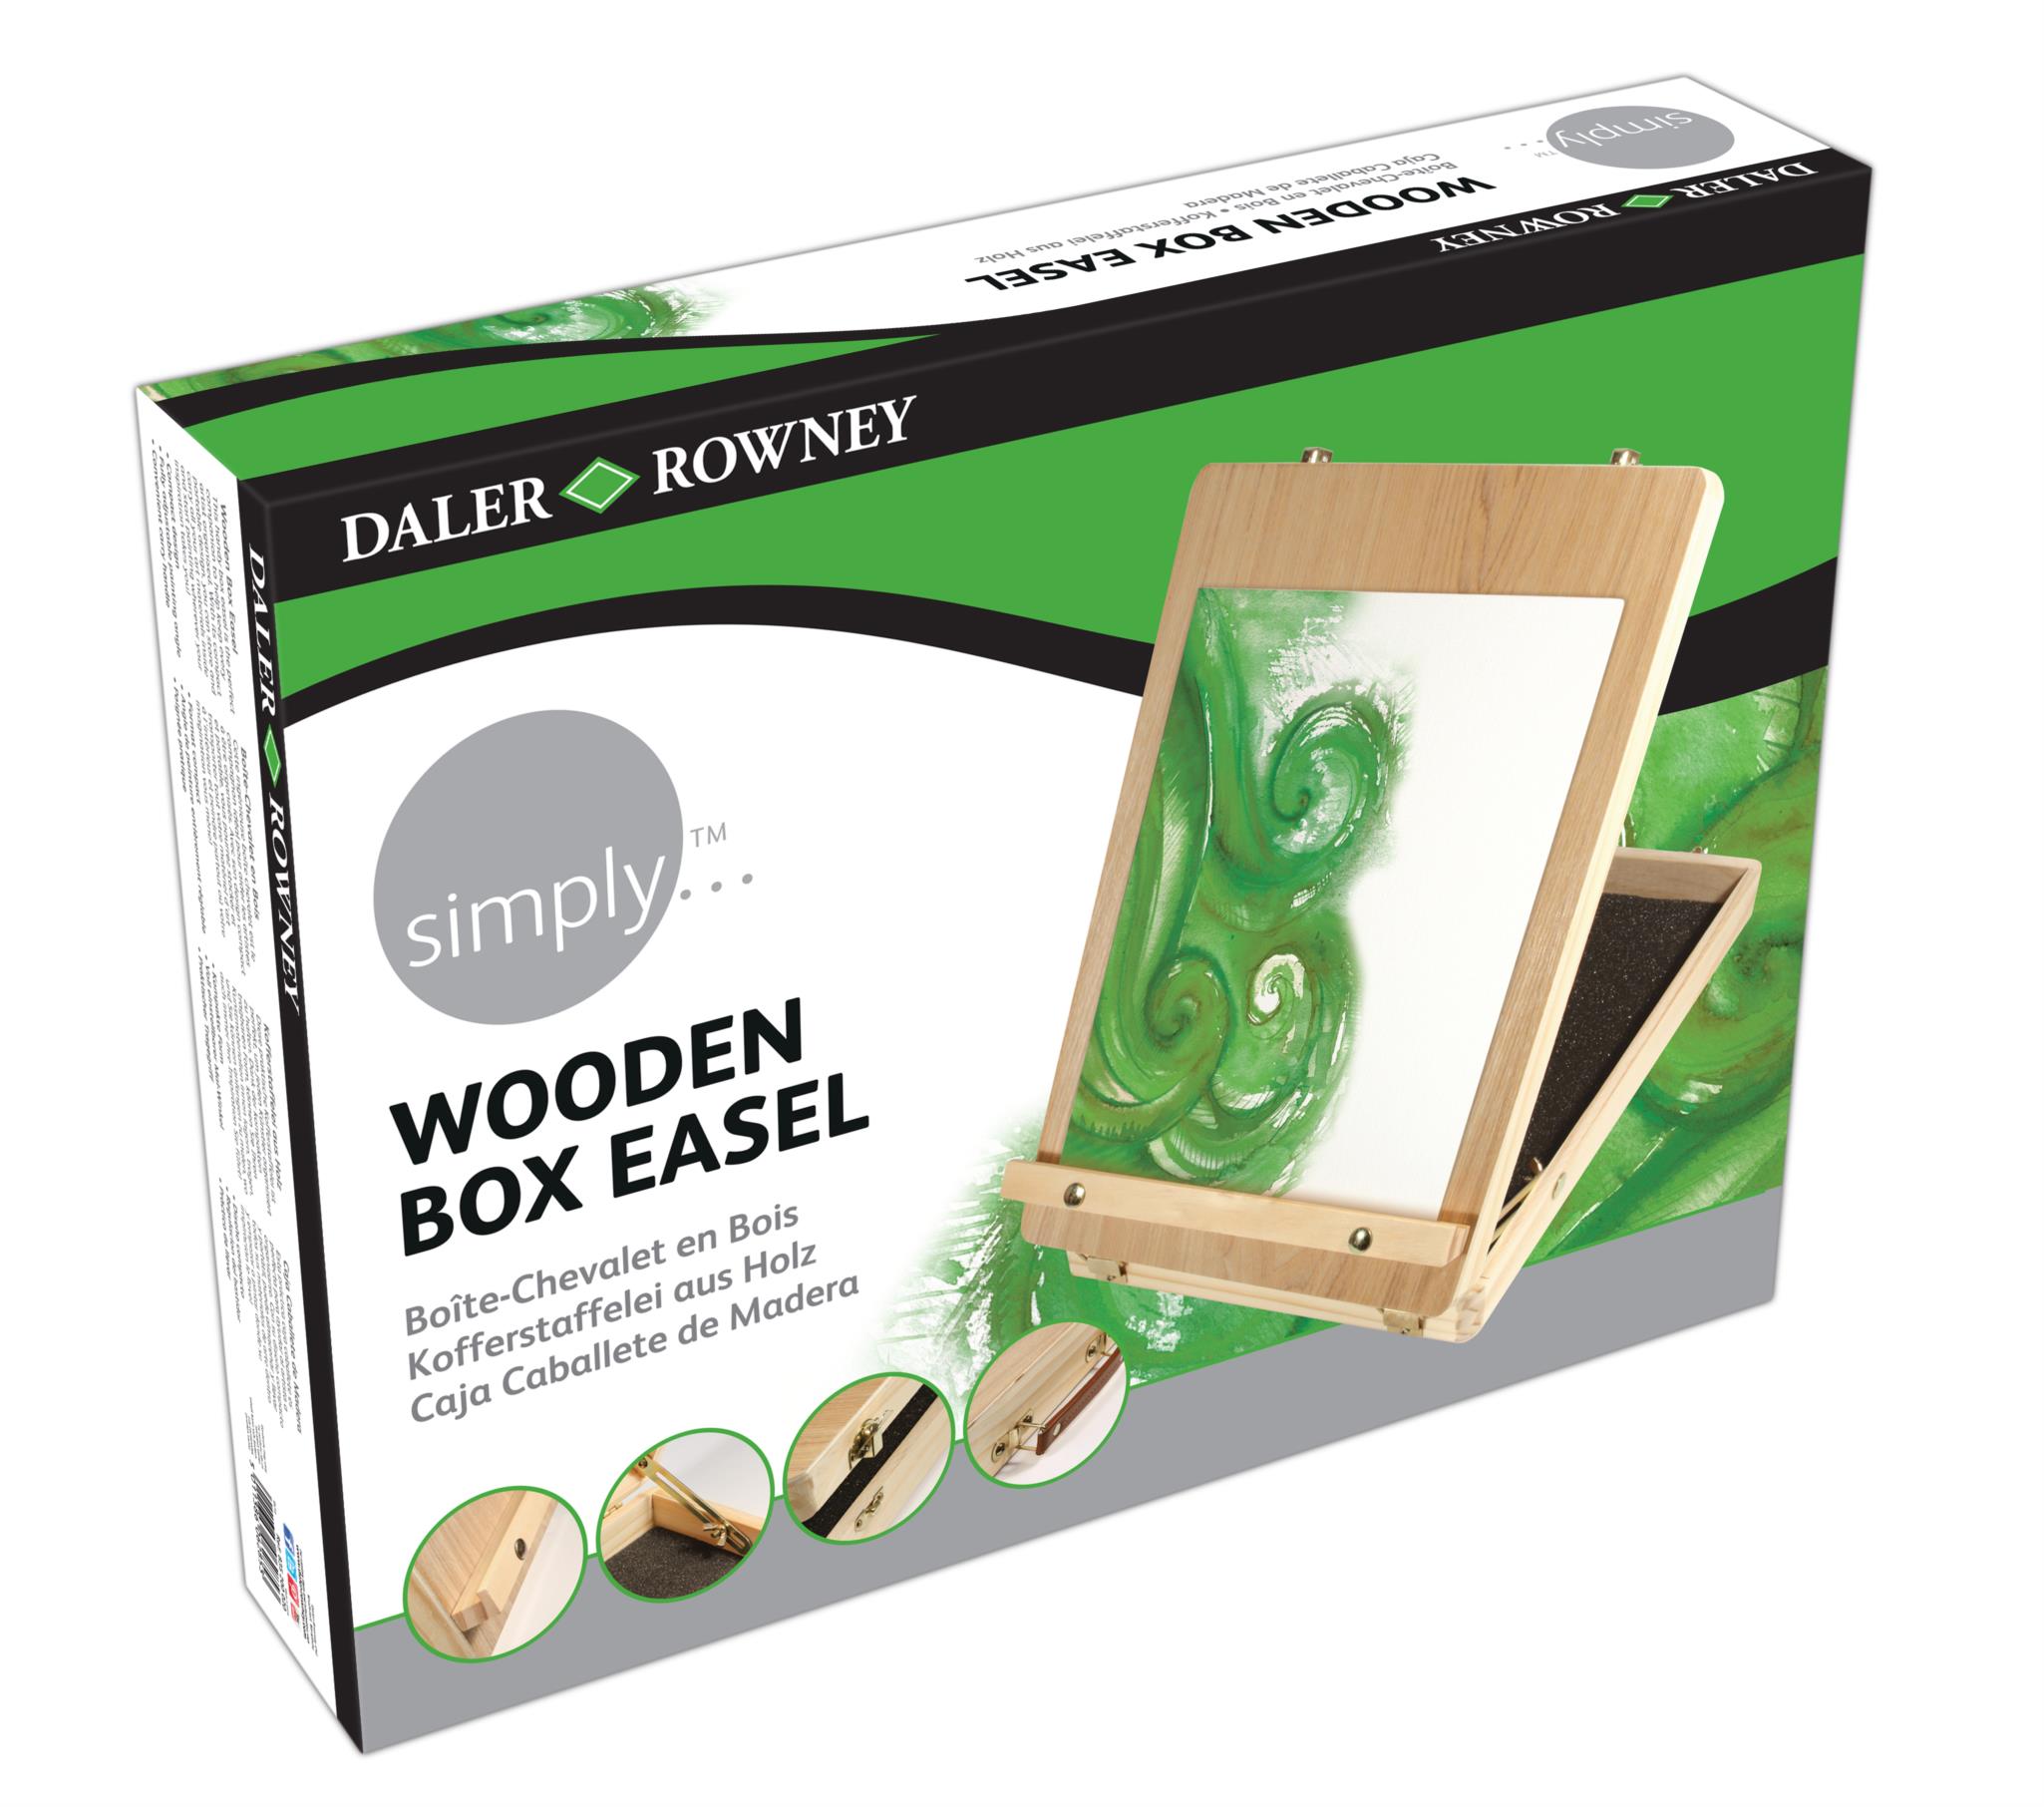 DALER ROWNEY SIMPLY WOODEN BOX EASEL